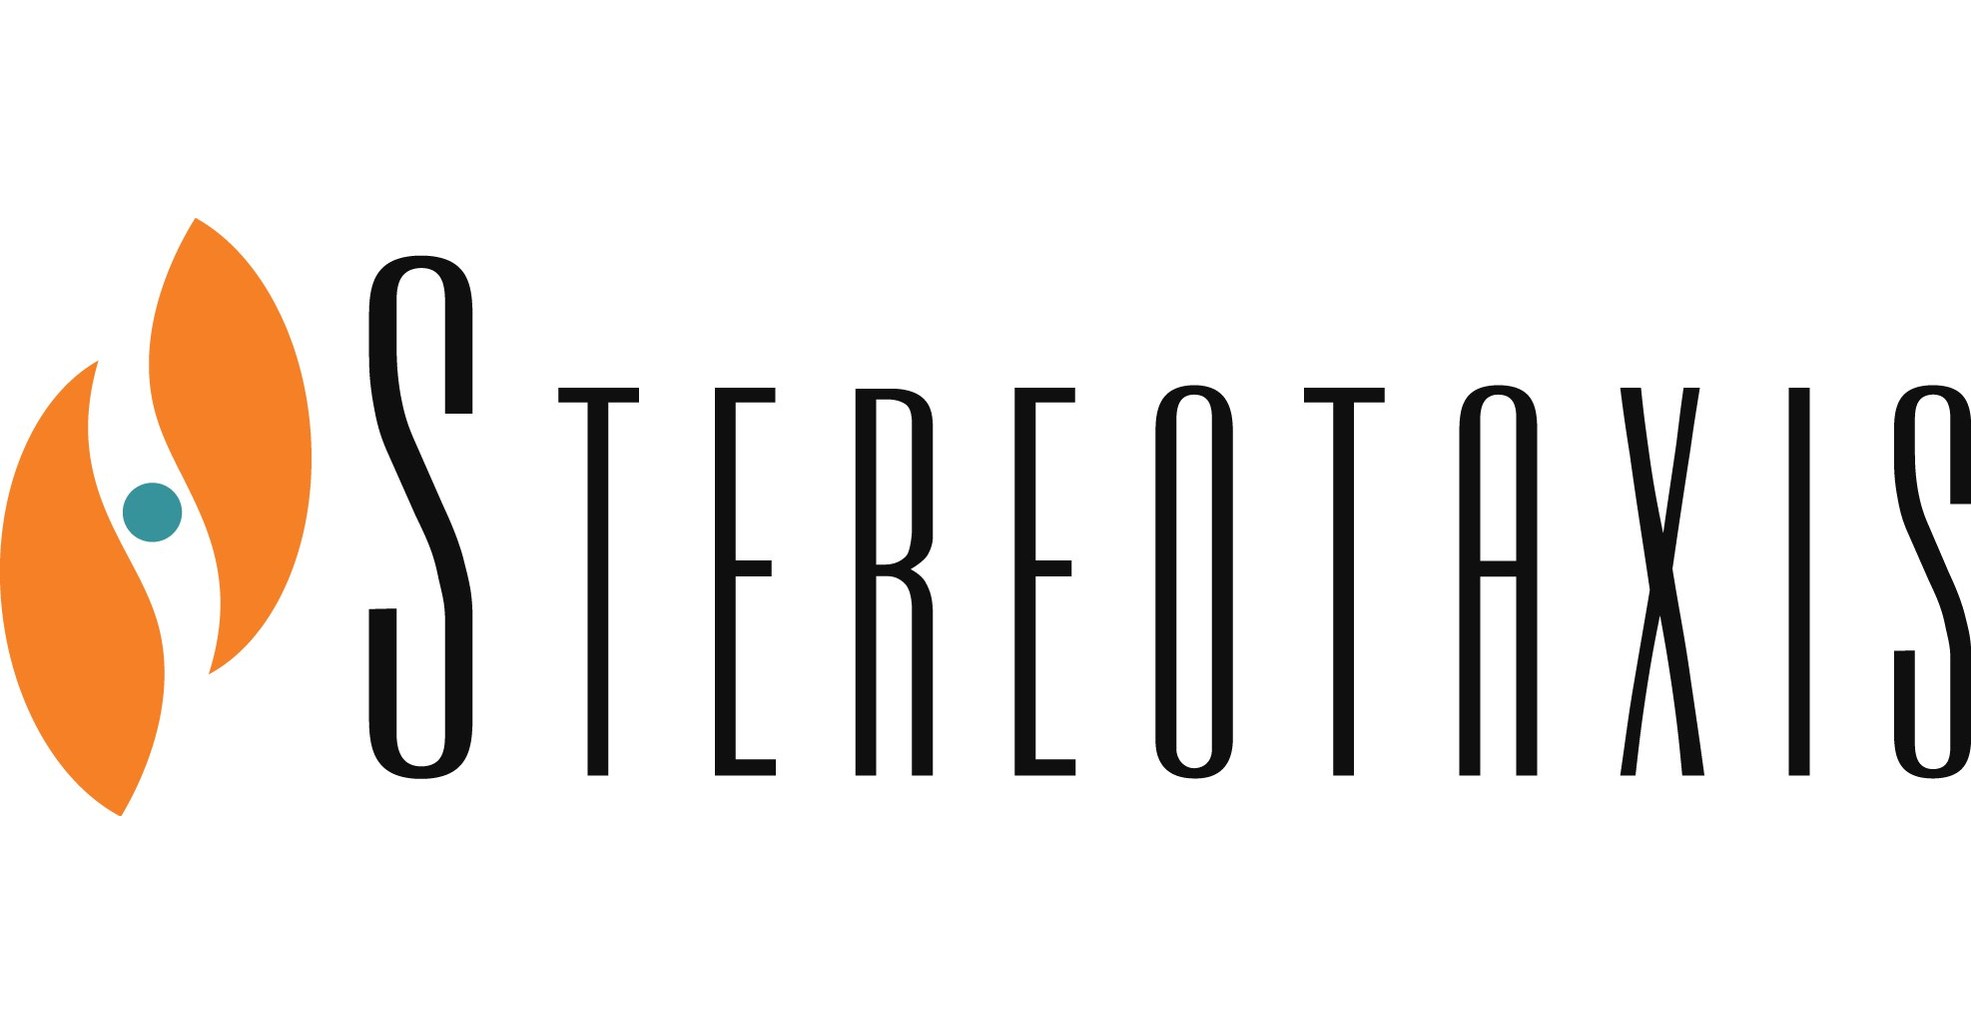 Stereotaxis is the global leader in innovative robotic technologies designed to enhance the treatment of arrhythmias and perform endovascular procedures.